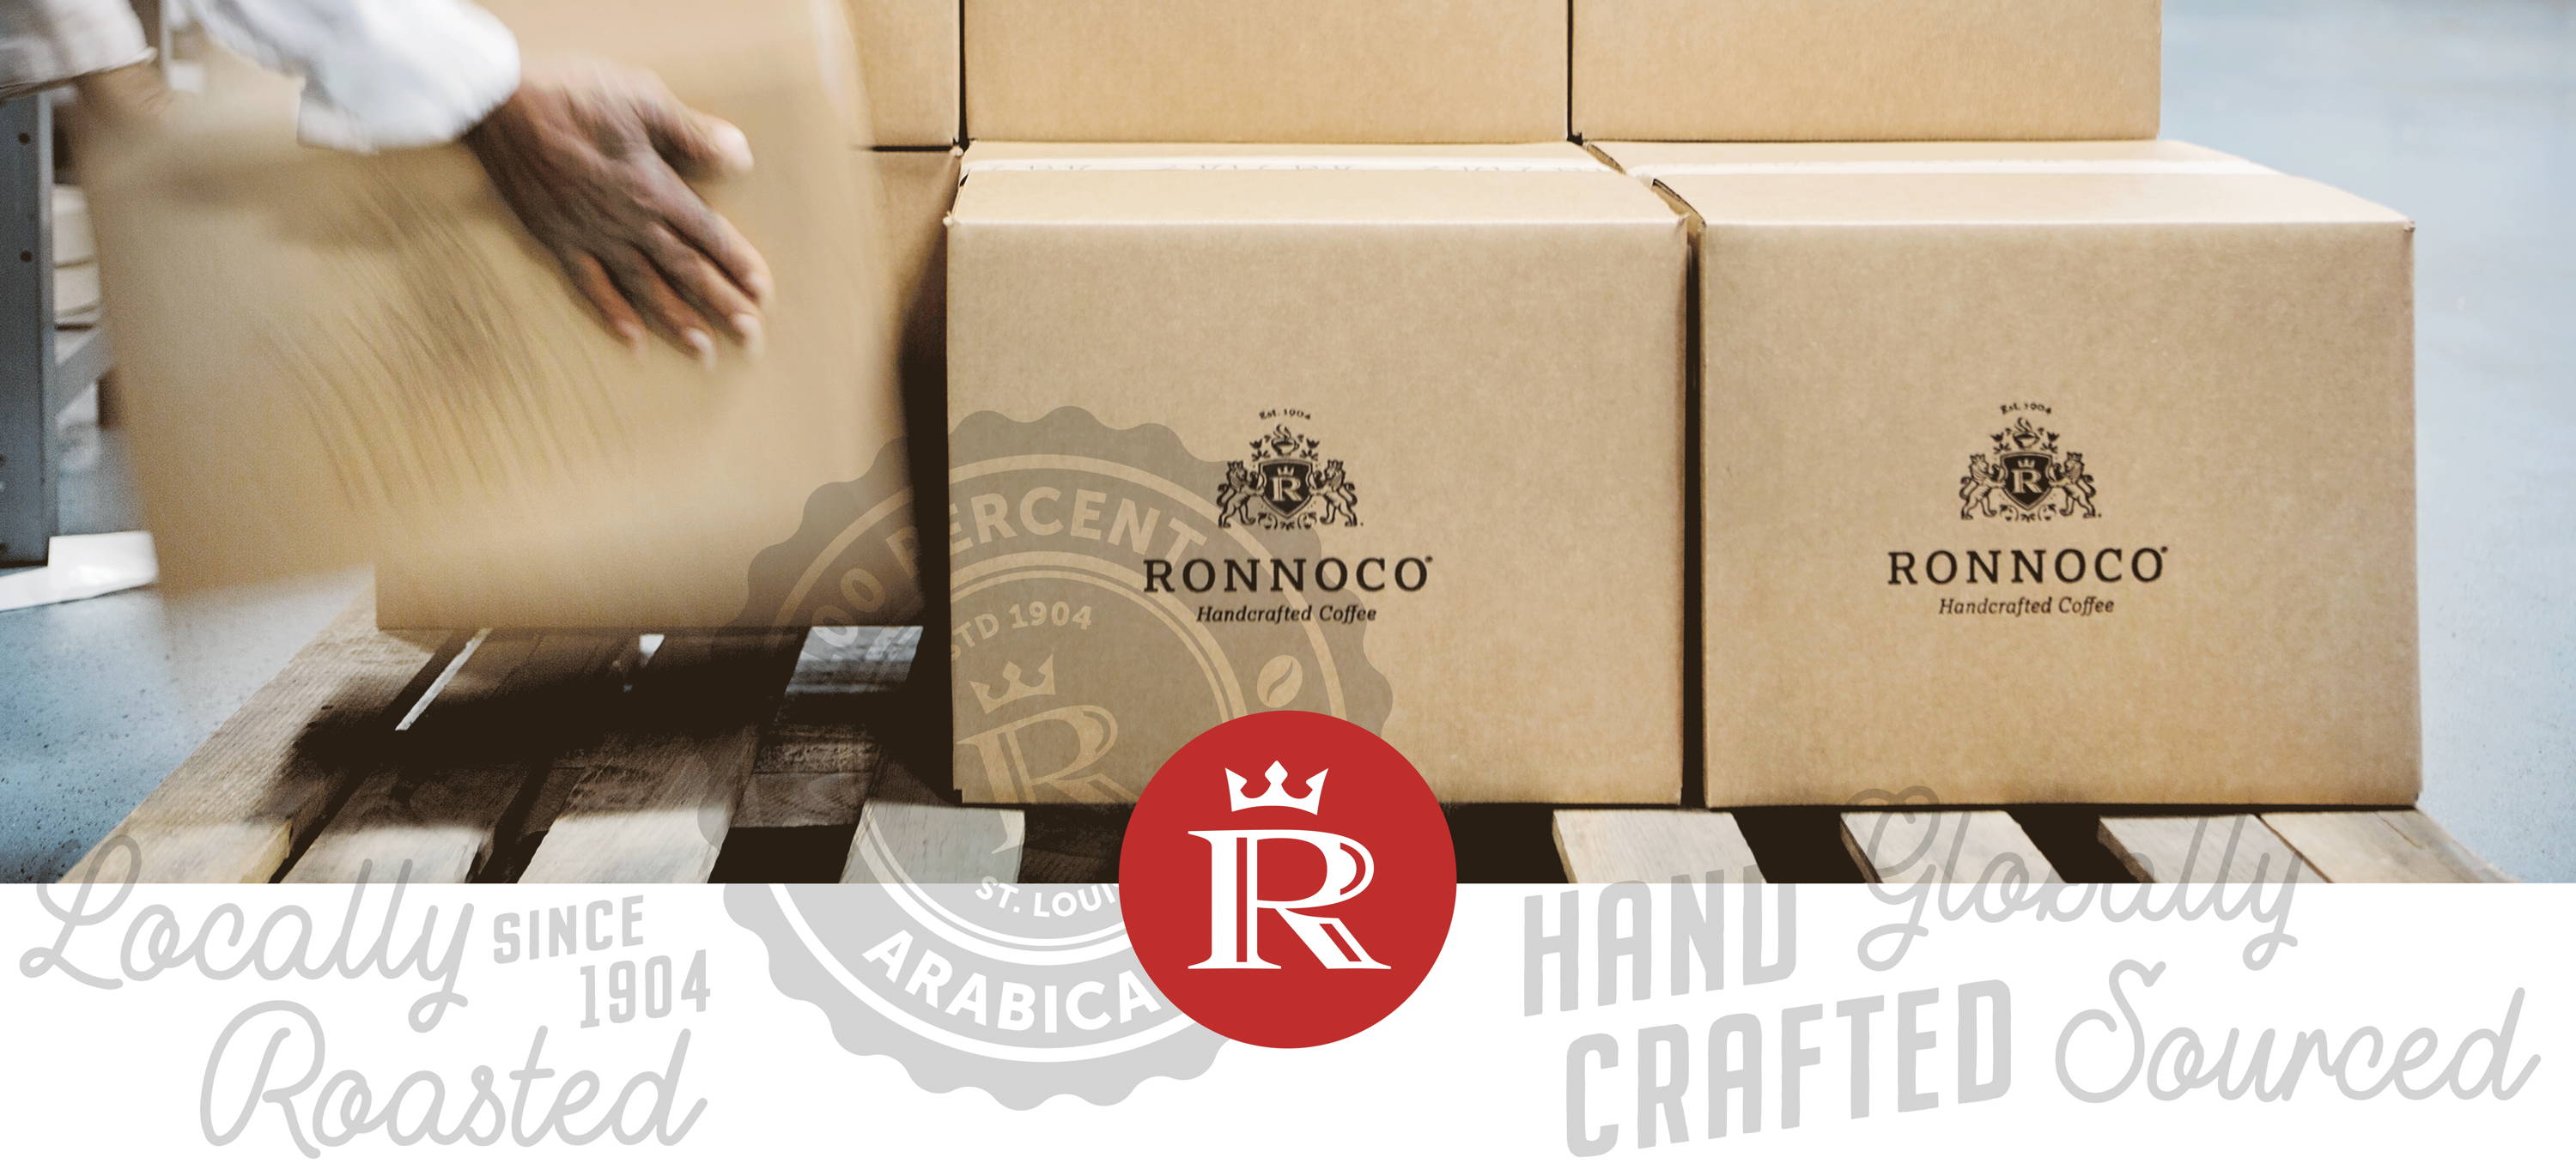 Boxes of Ronnoco Coffee